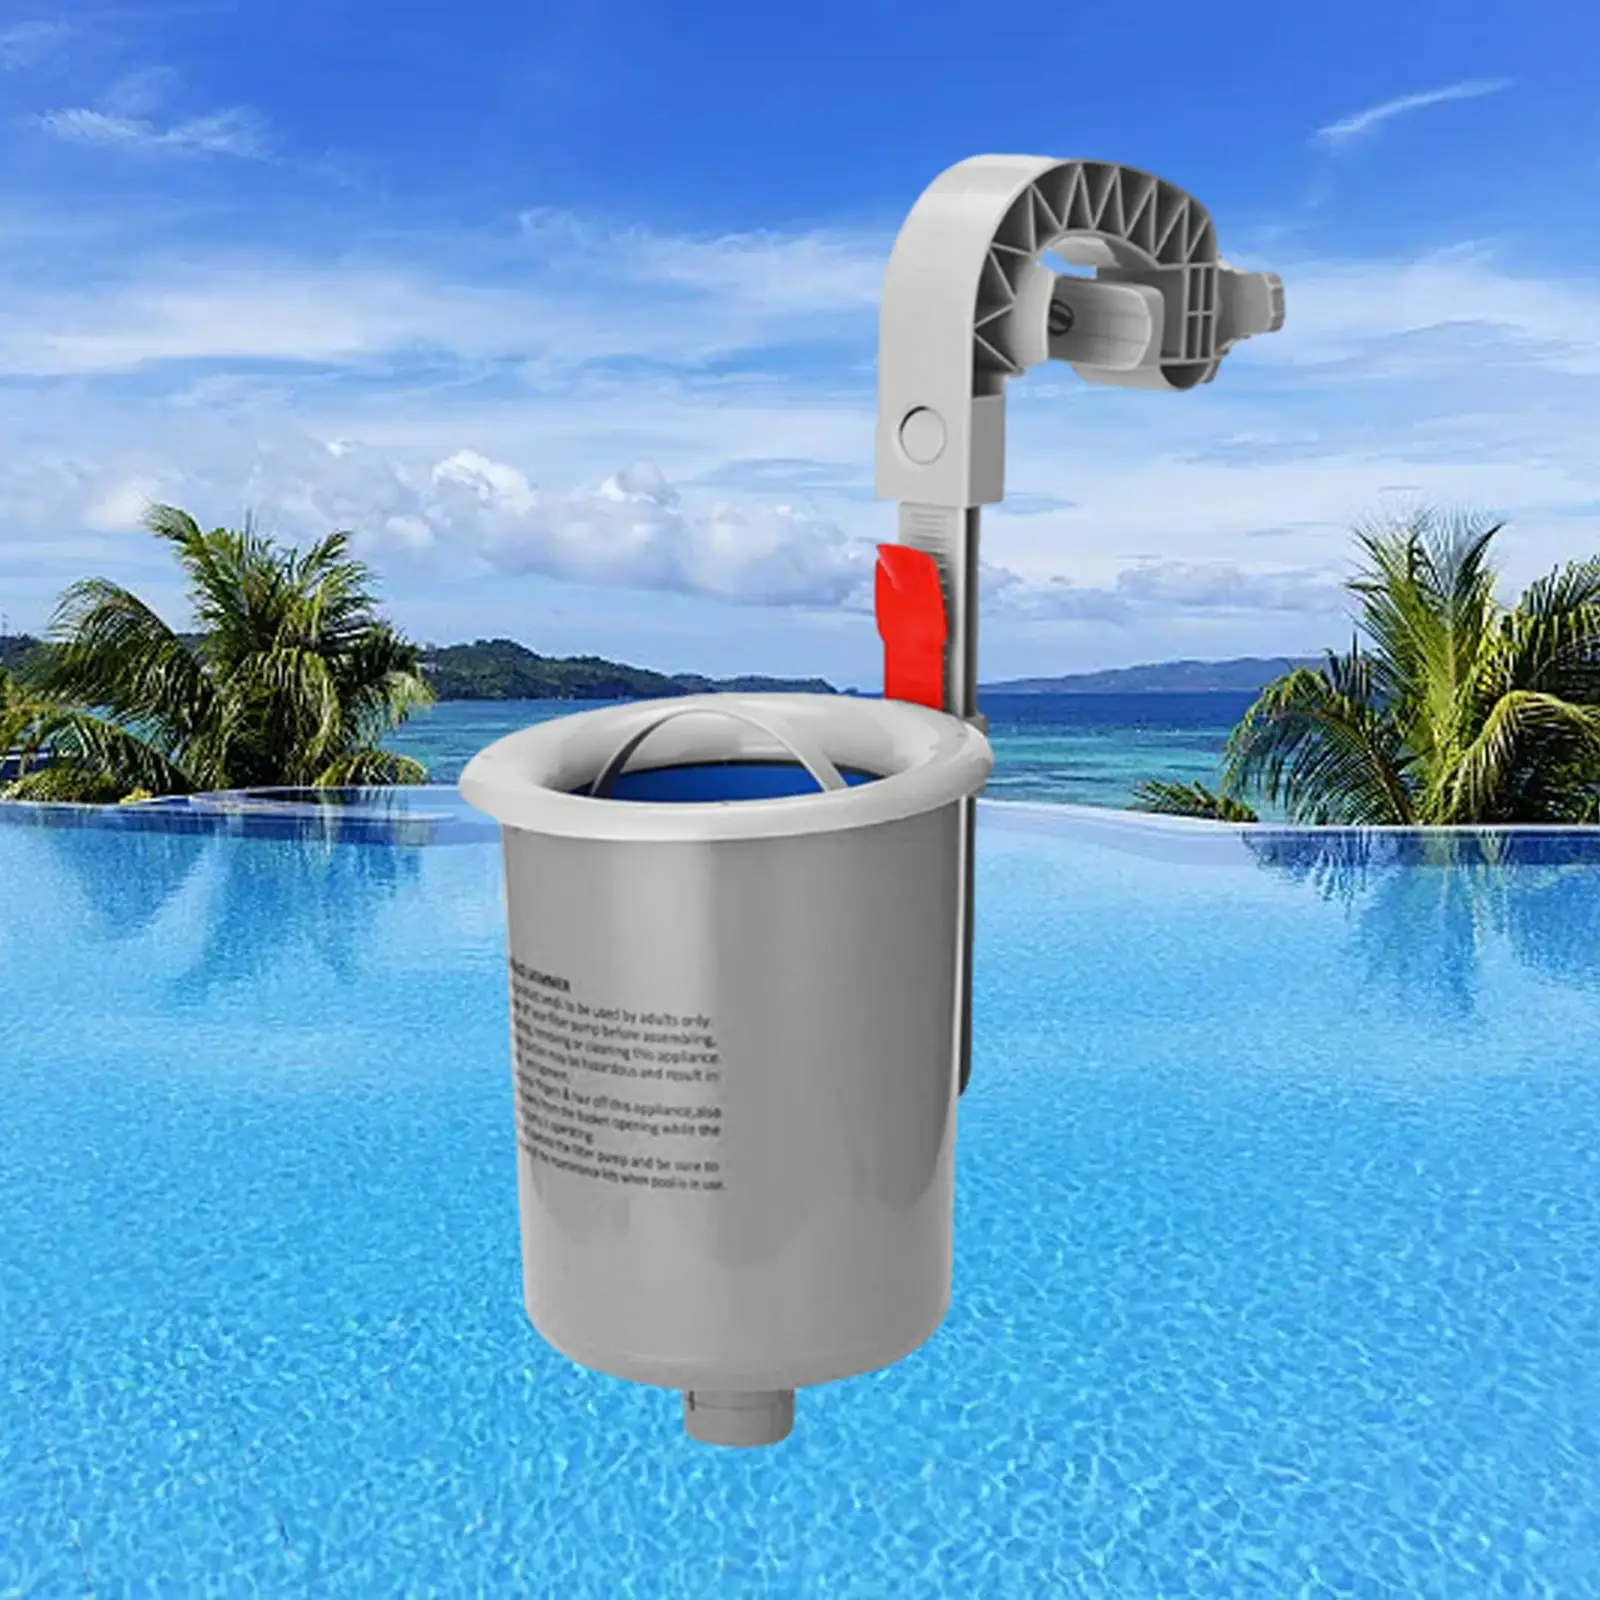 Automatic Pool Skimmer Wall Mount Floating Pool Filter Pool Maintenance Cleaner with Basket Durable Surface Skimmer Leaf